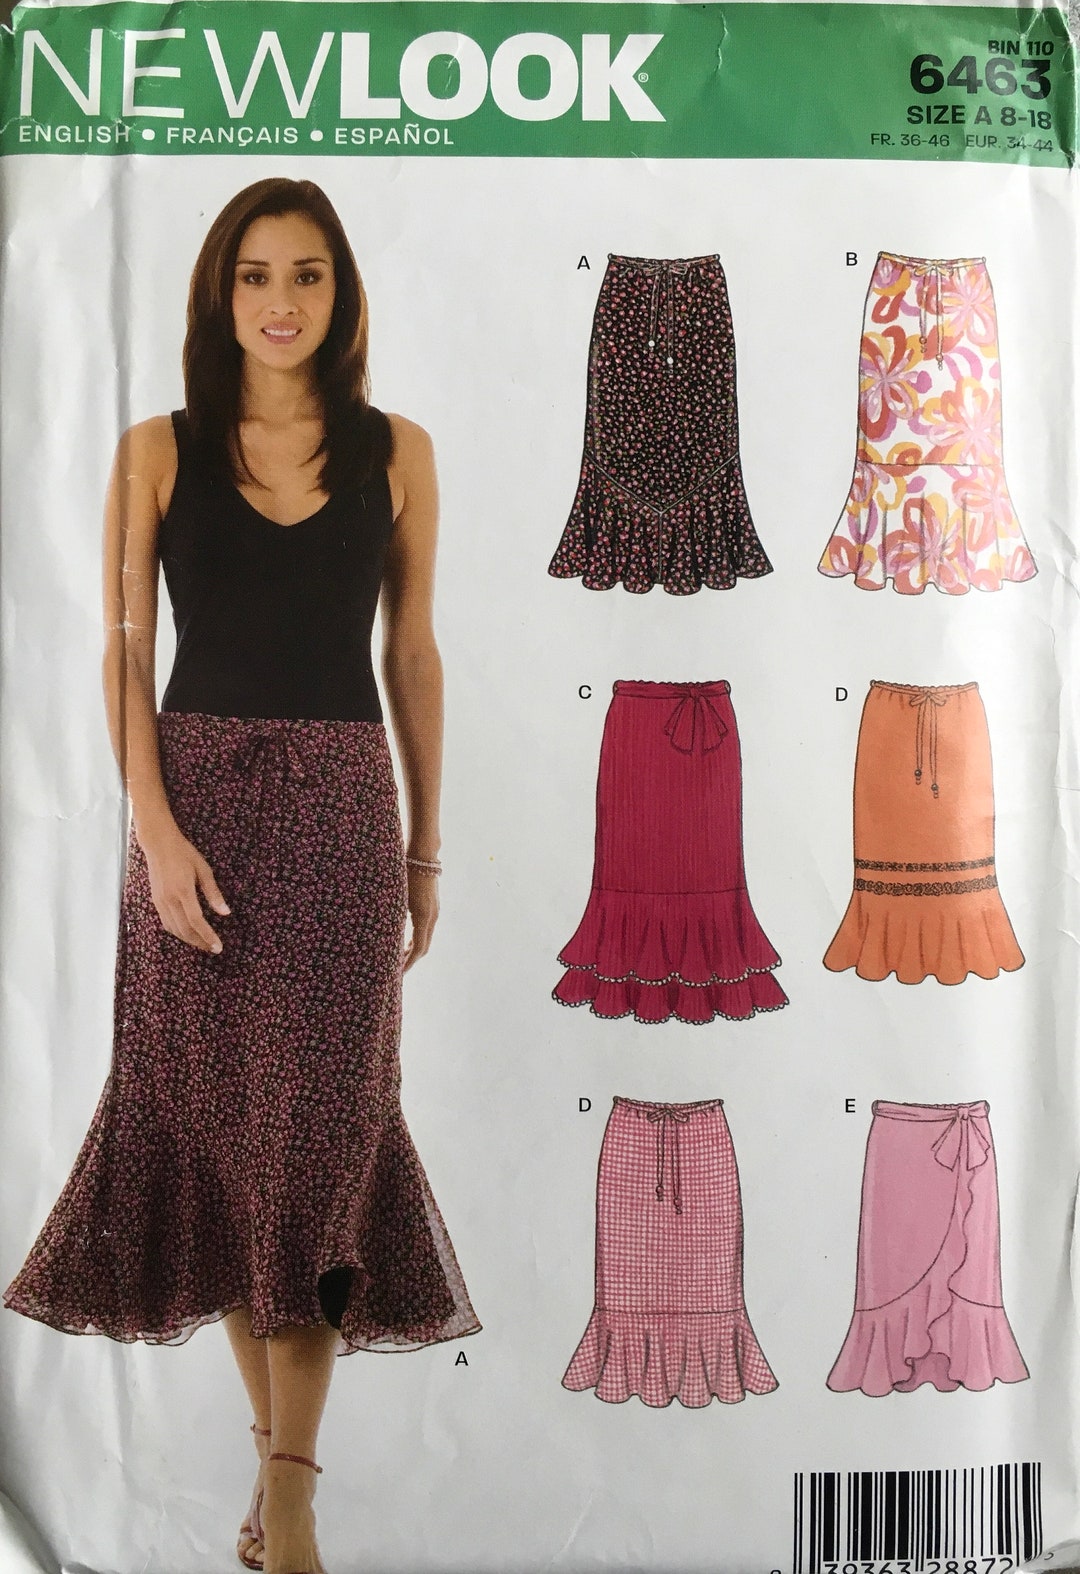 New Look 6463 Sewing Pattern UNCUT - Etsy